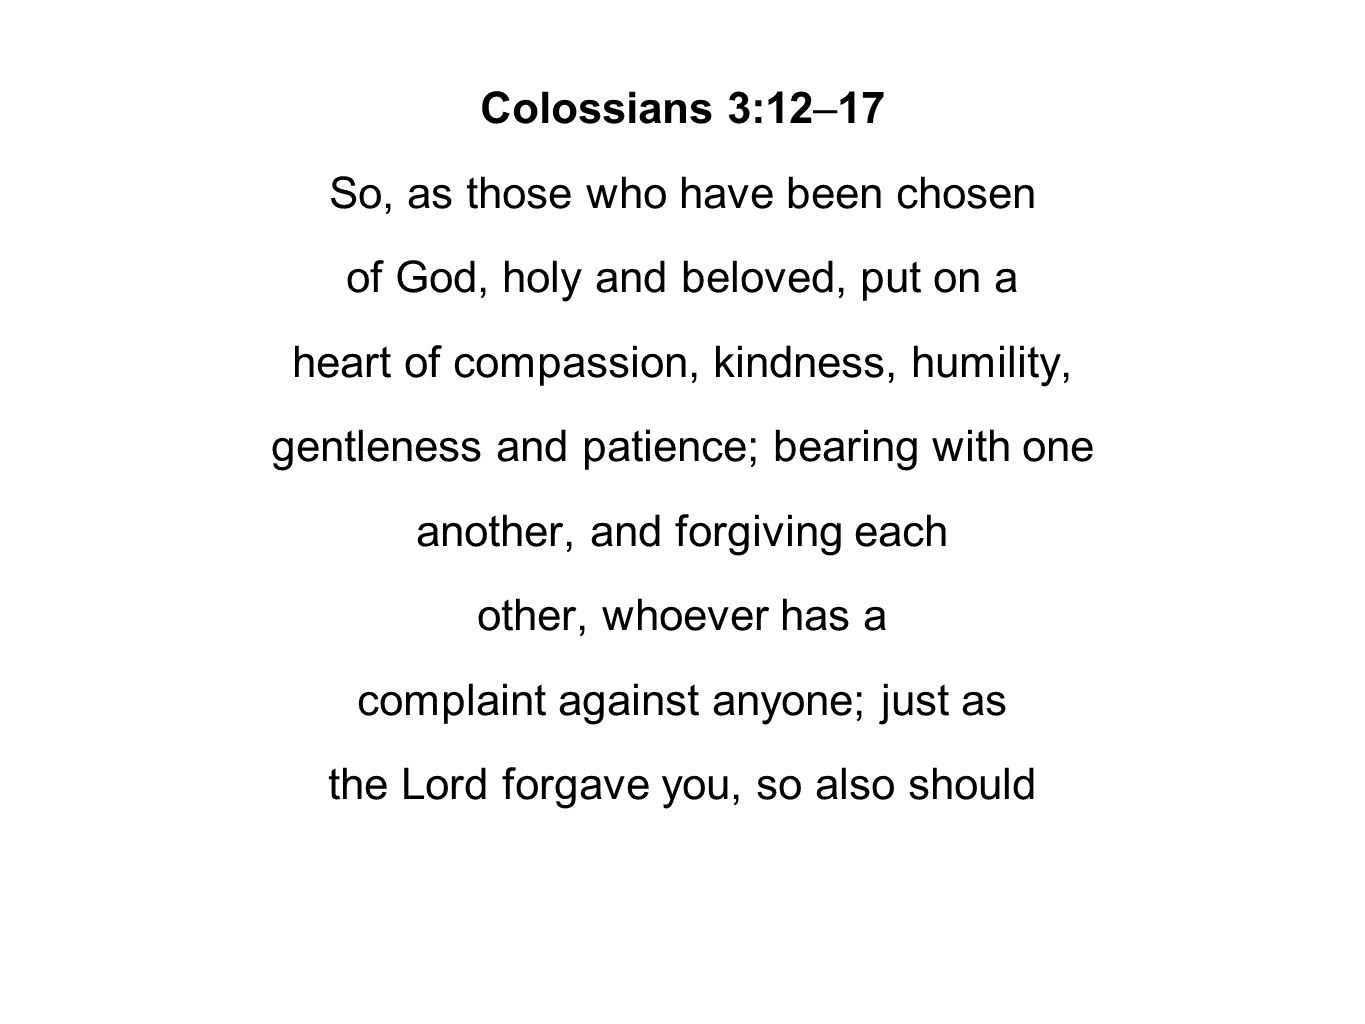 Colossians 3:12–17 So, as those who have been chosen of God, holy and beloved, put on a heart of compassion, kindness, humility, gentleness and patience; bearing with one another, and forgiving each other, whoever has a complaint against anyone; just as the Lord forgave you, so also should